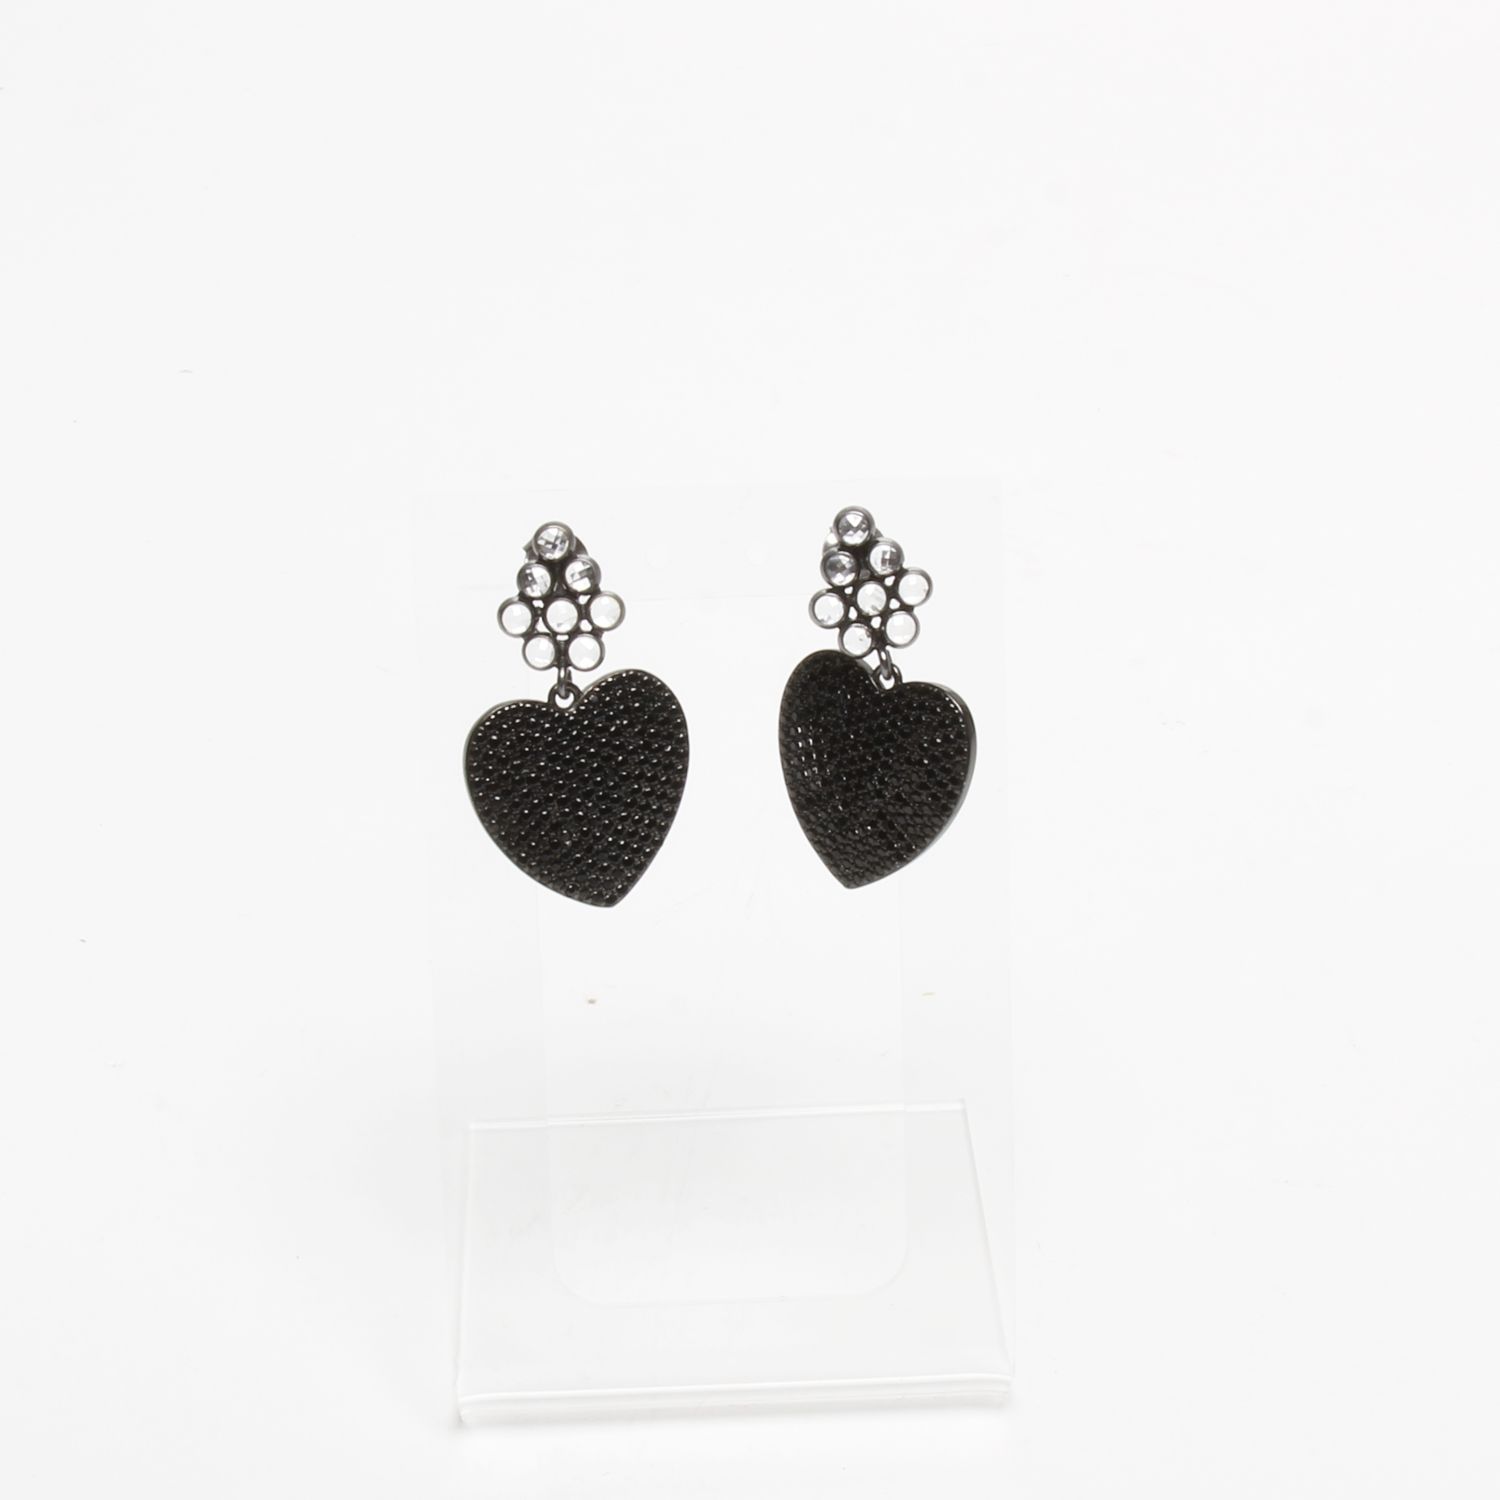 Valentine Rouge Jewellery: Black Amour Heart Earrings Product Image 2 of 2